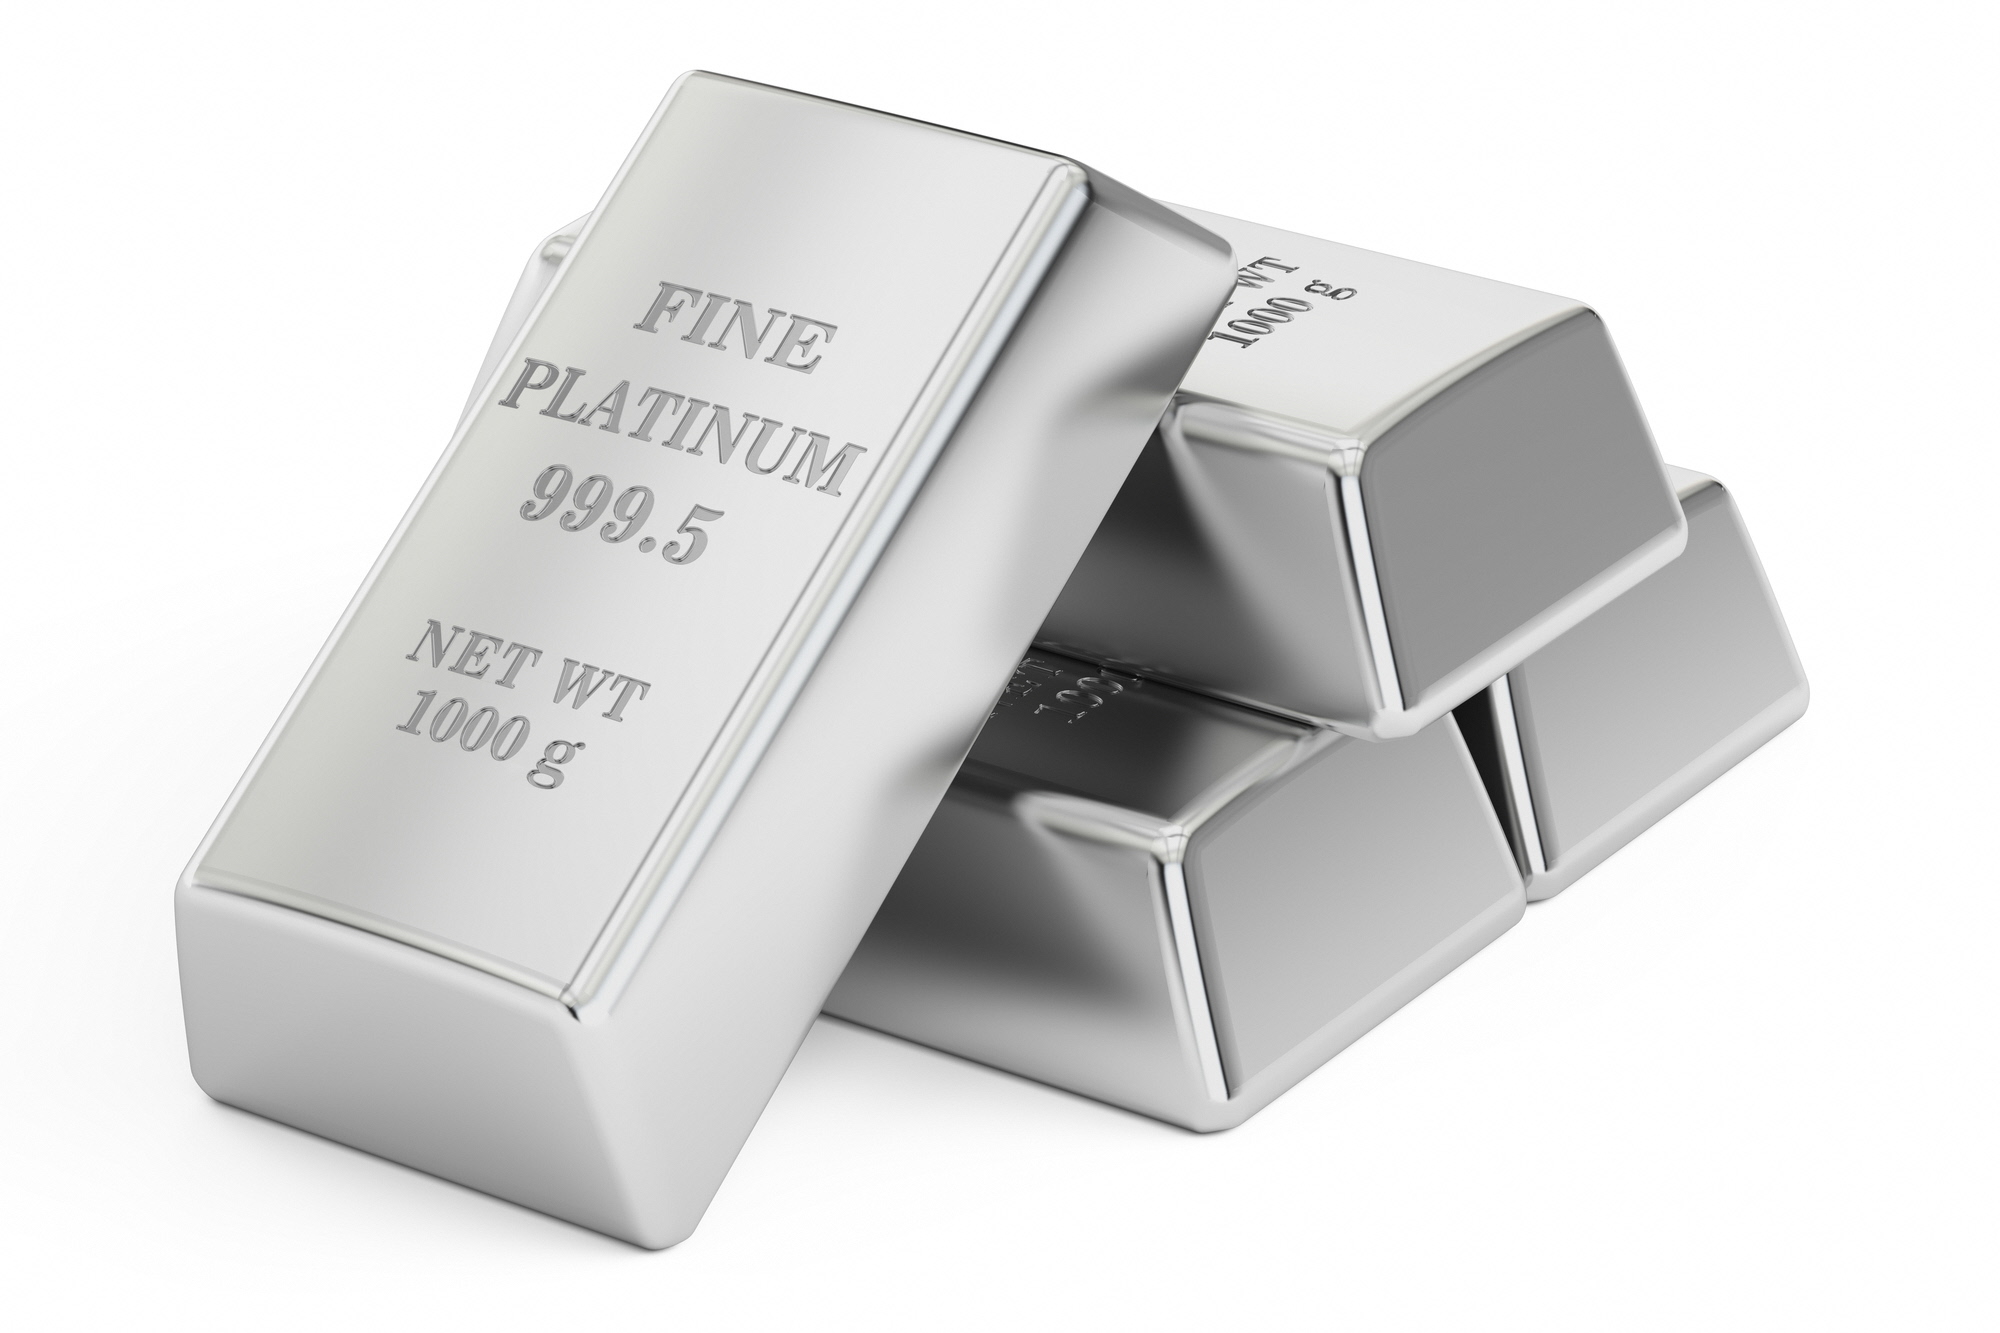 Platinum Futures, An Important Trading Tool for Building Sustainable Society